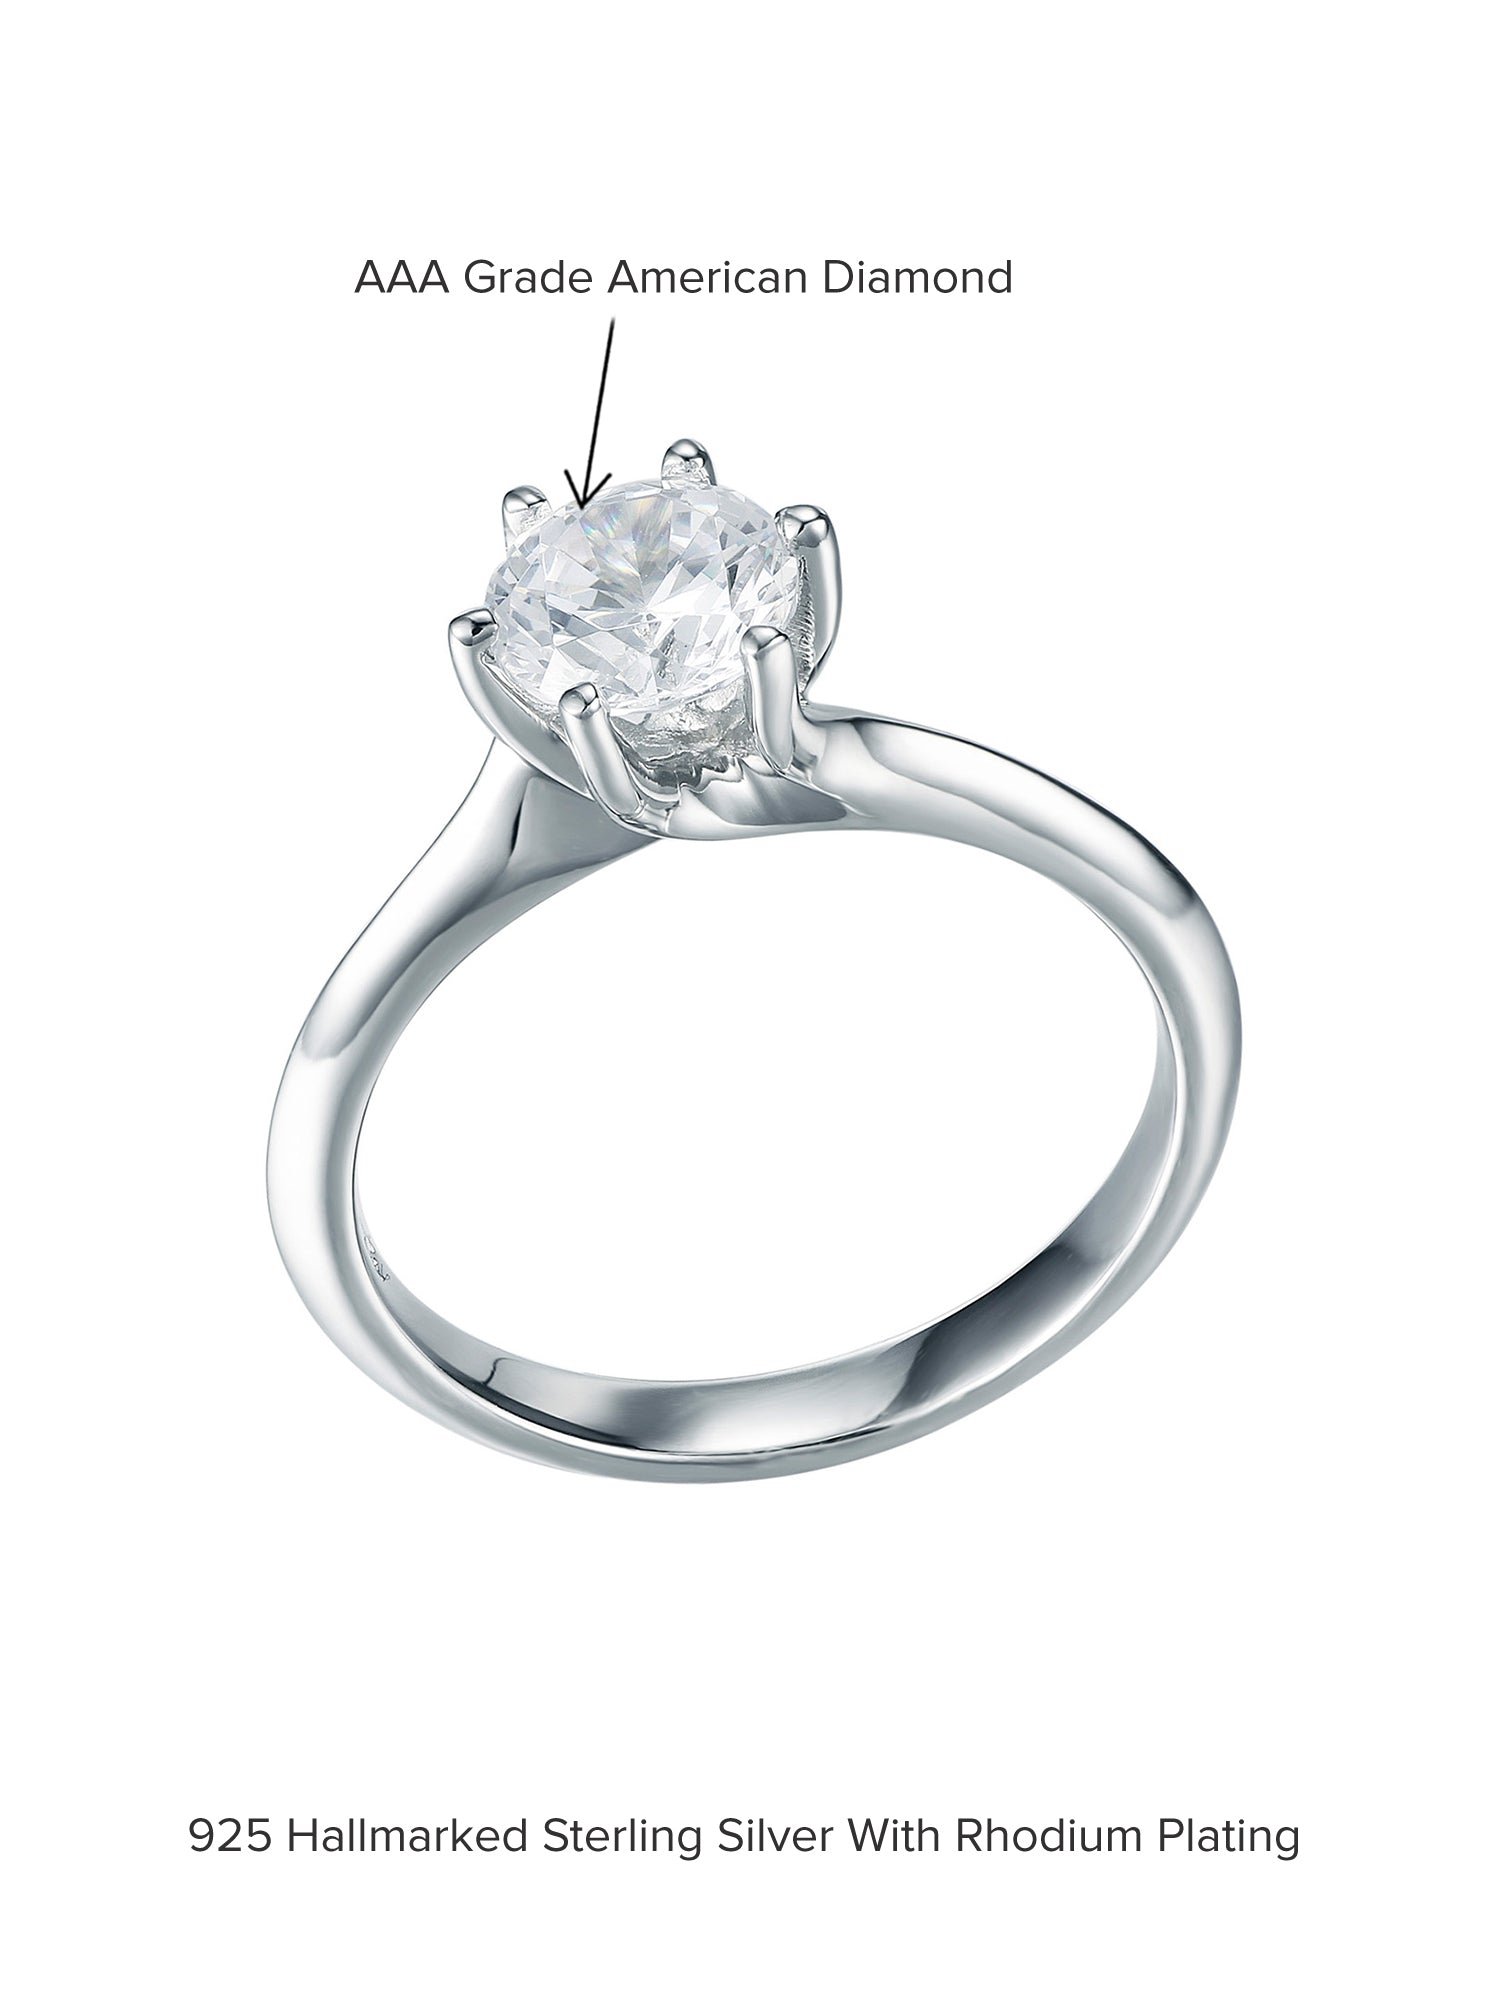 SIX PRONG 2 CARAT SOLITAIRE AMERICAN DIAMOND 925 SILVER RING